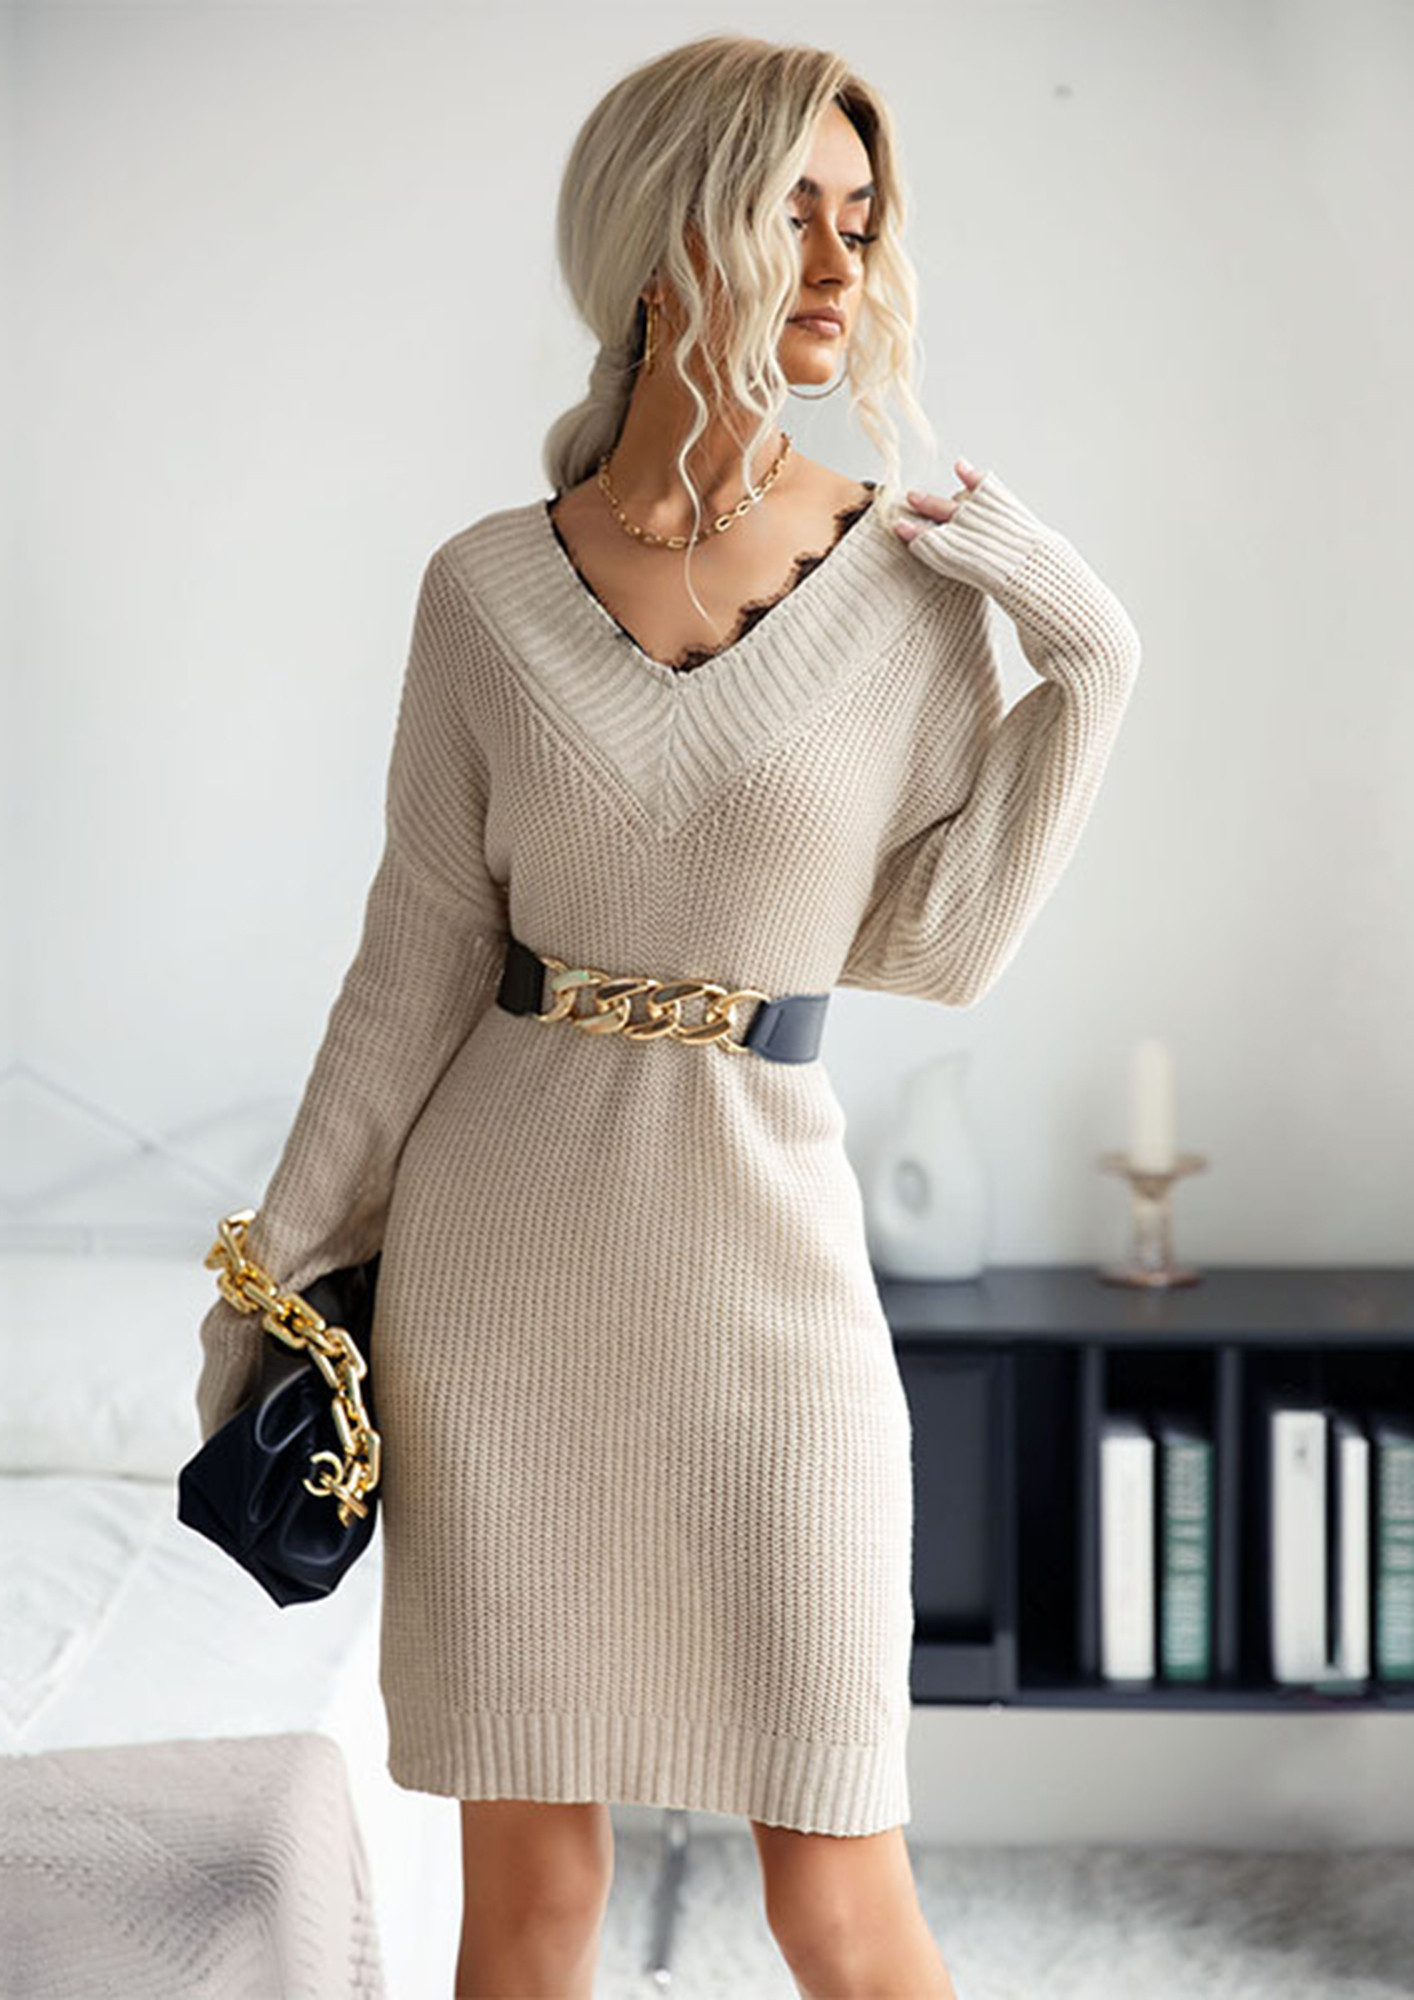 Winter Collision Dresses - Buy Winter Collision Dresses online in India